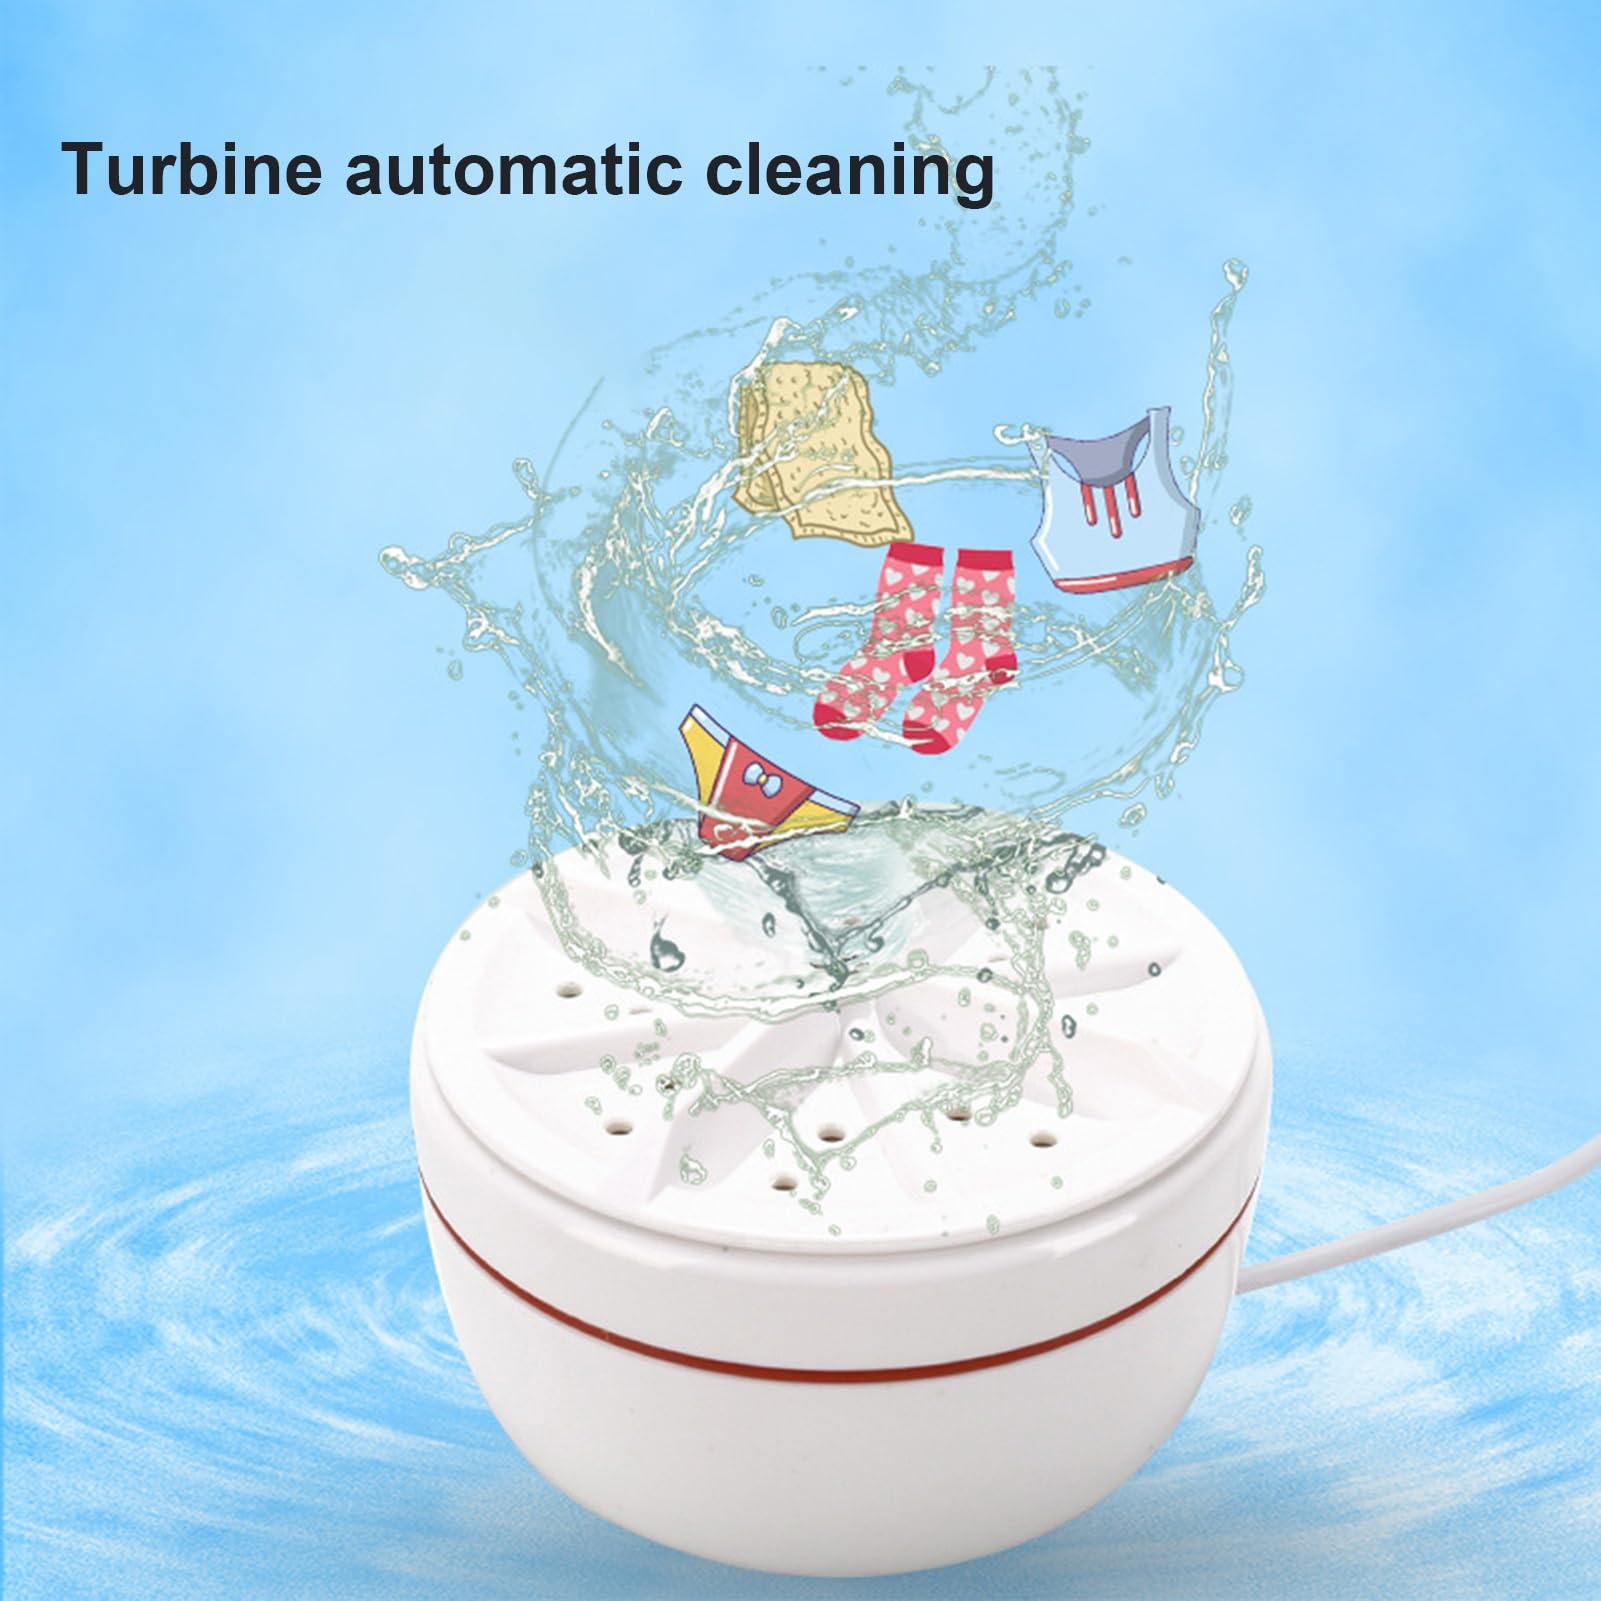 YESBAY Portable Washing Machine Travel Washing Machine Travel Washer Mini Washing Machine Rotating Turbine Suction Cup Laundry ABS Turbo Sink Washing Machine for Home, Business, Travel, College White